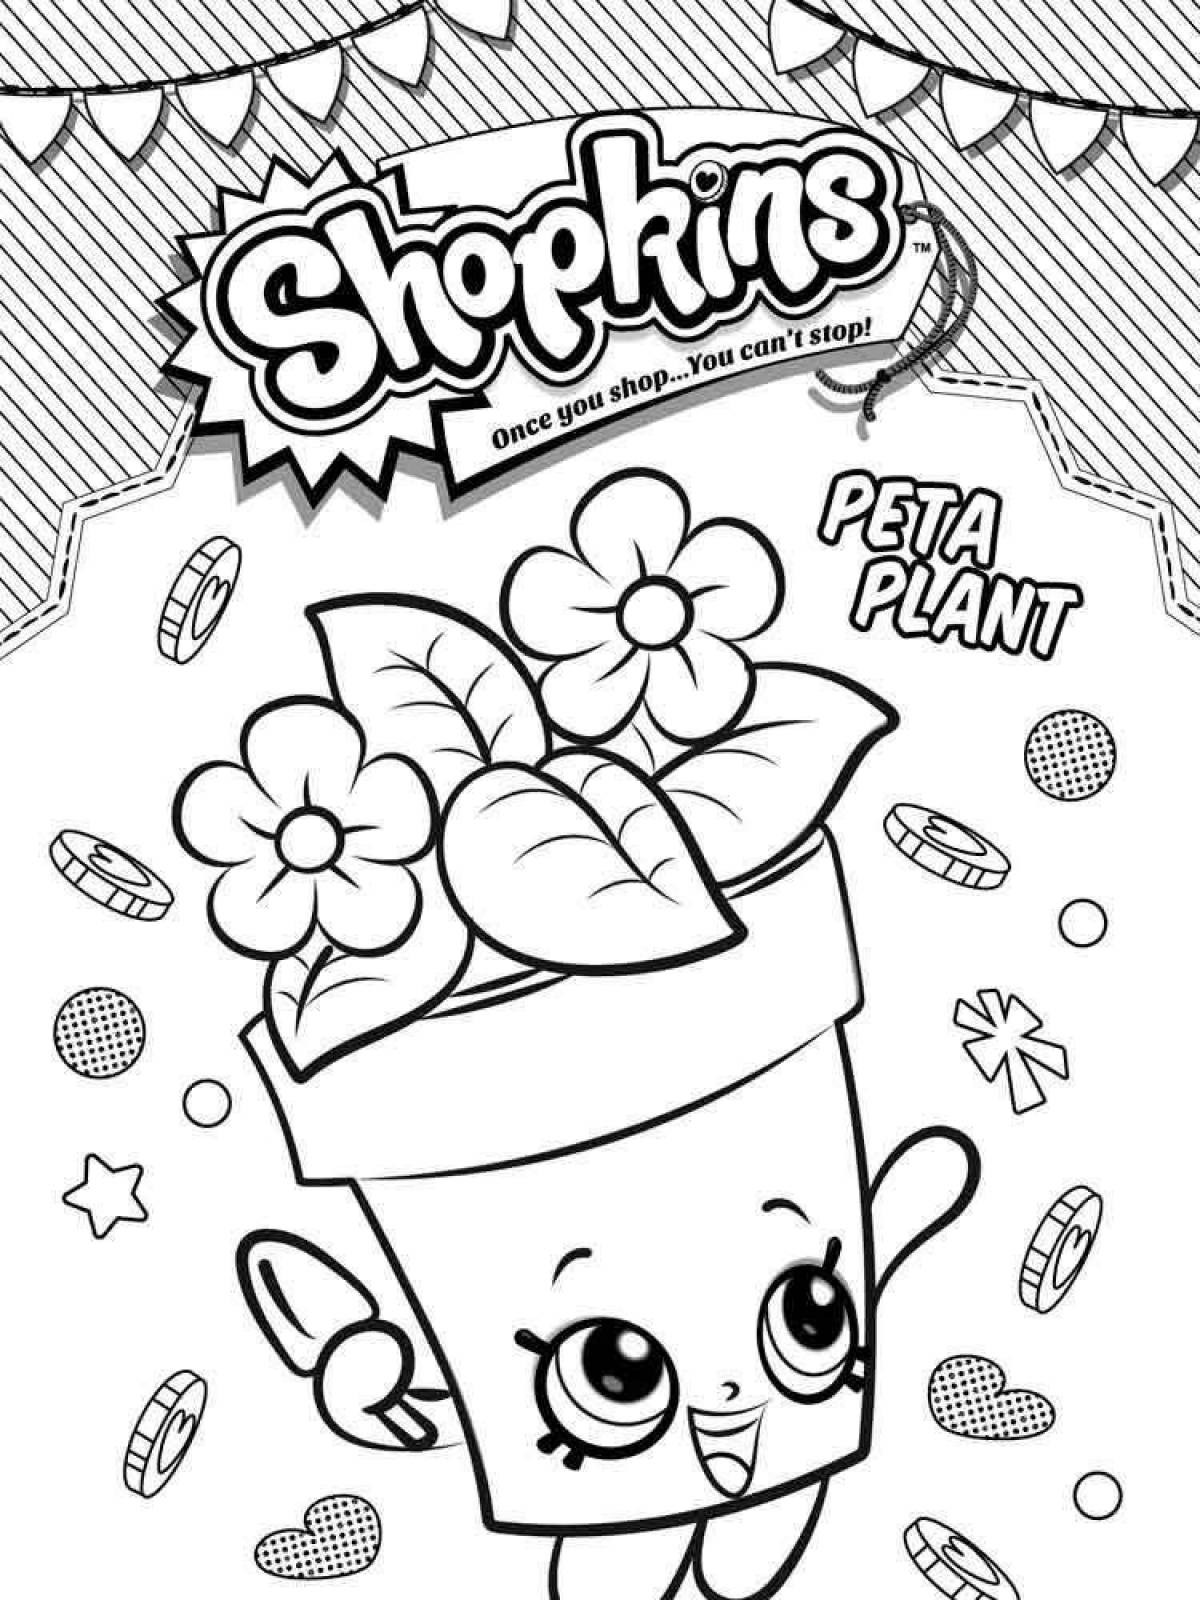 Shopkins coloring book for kids